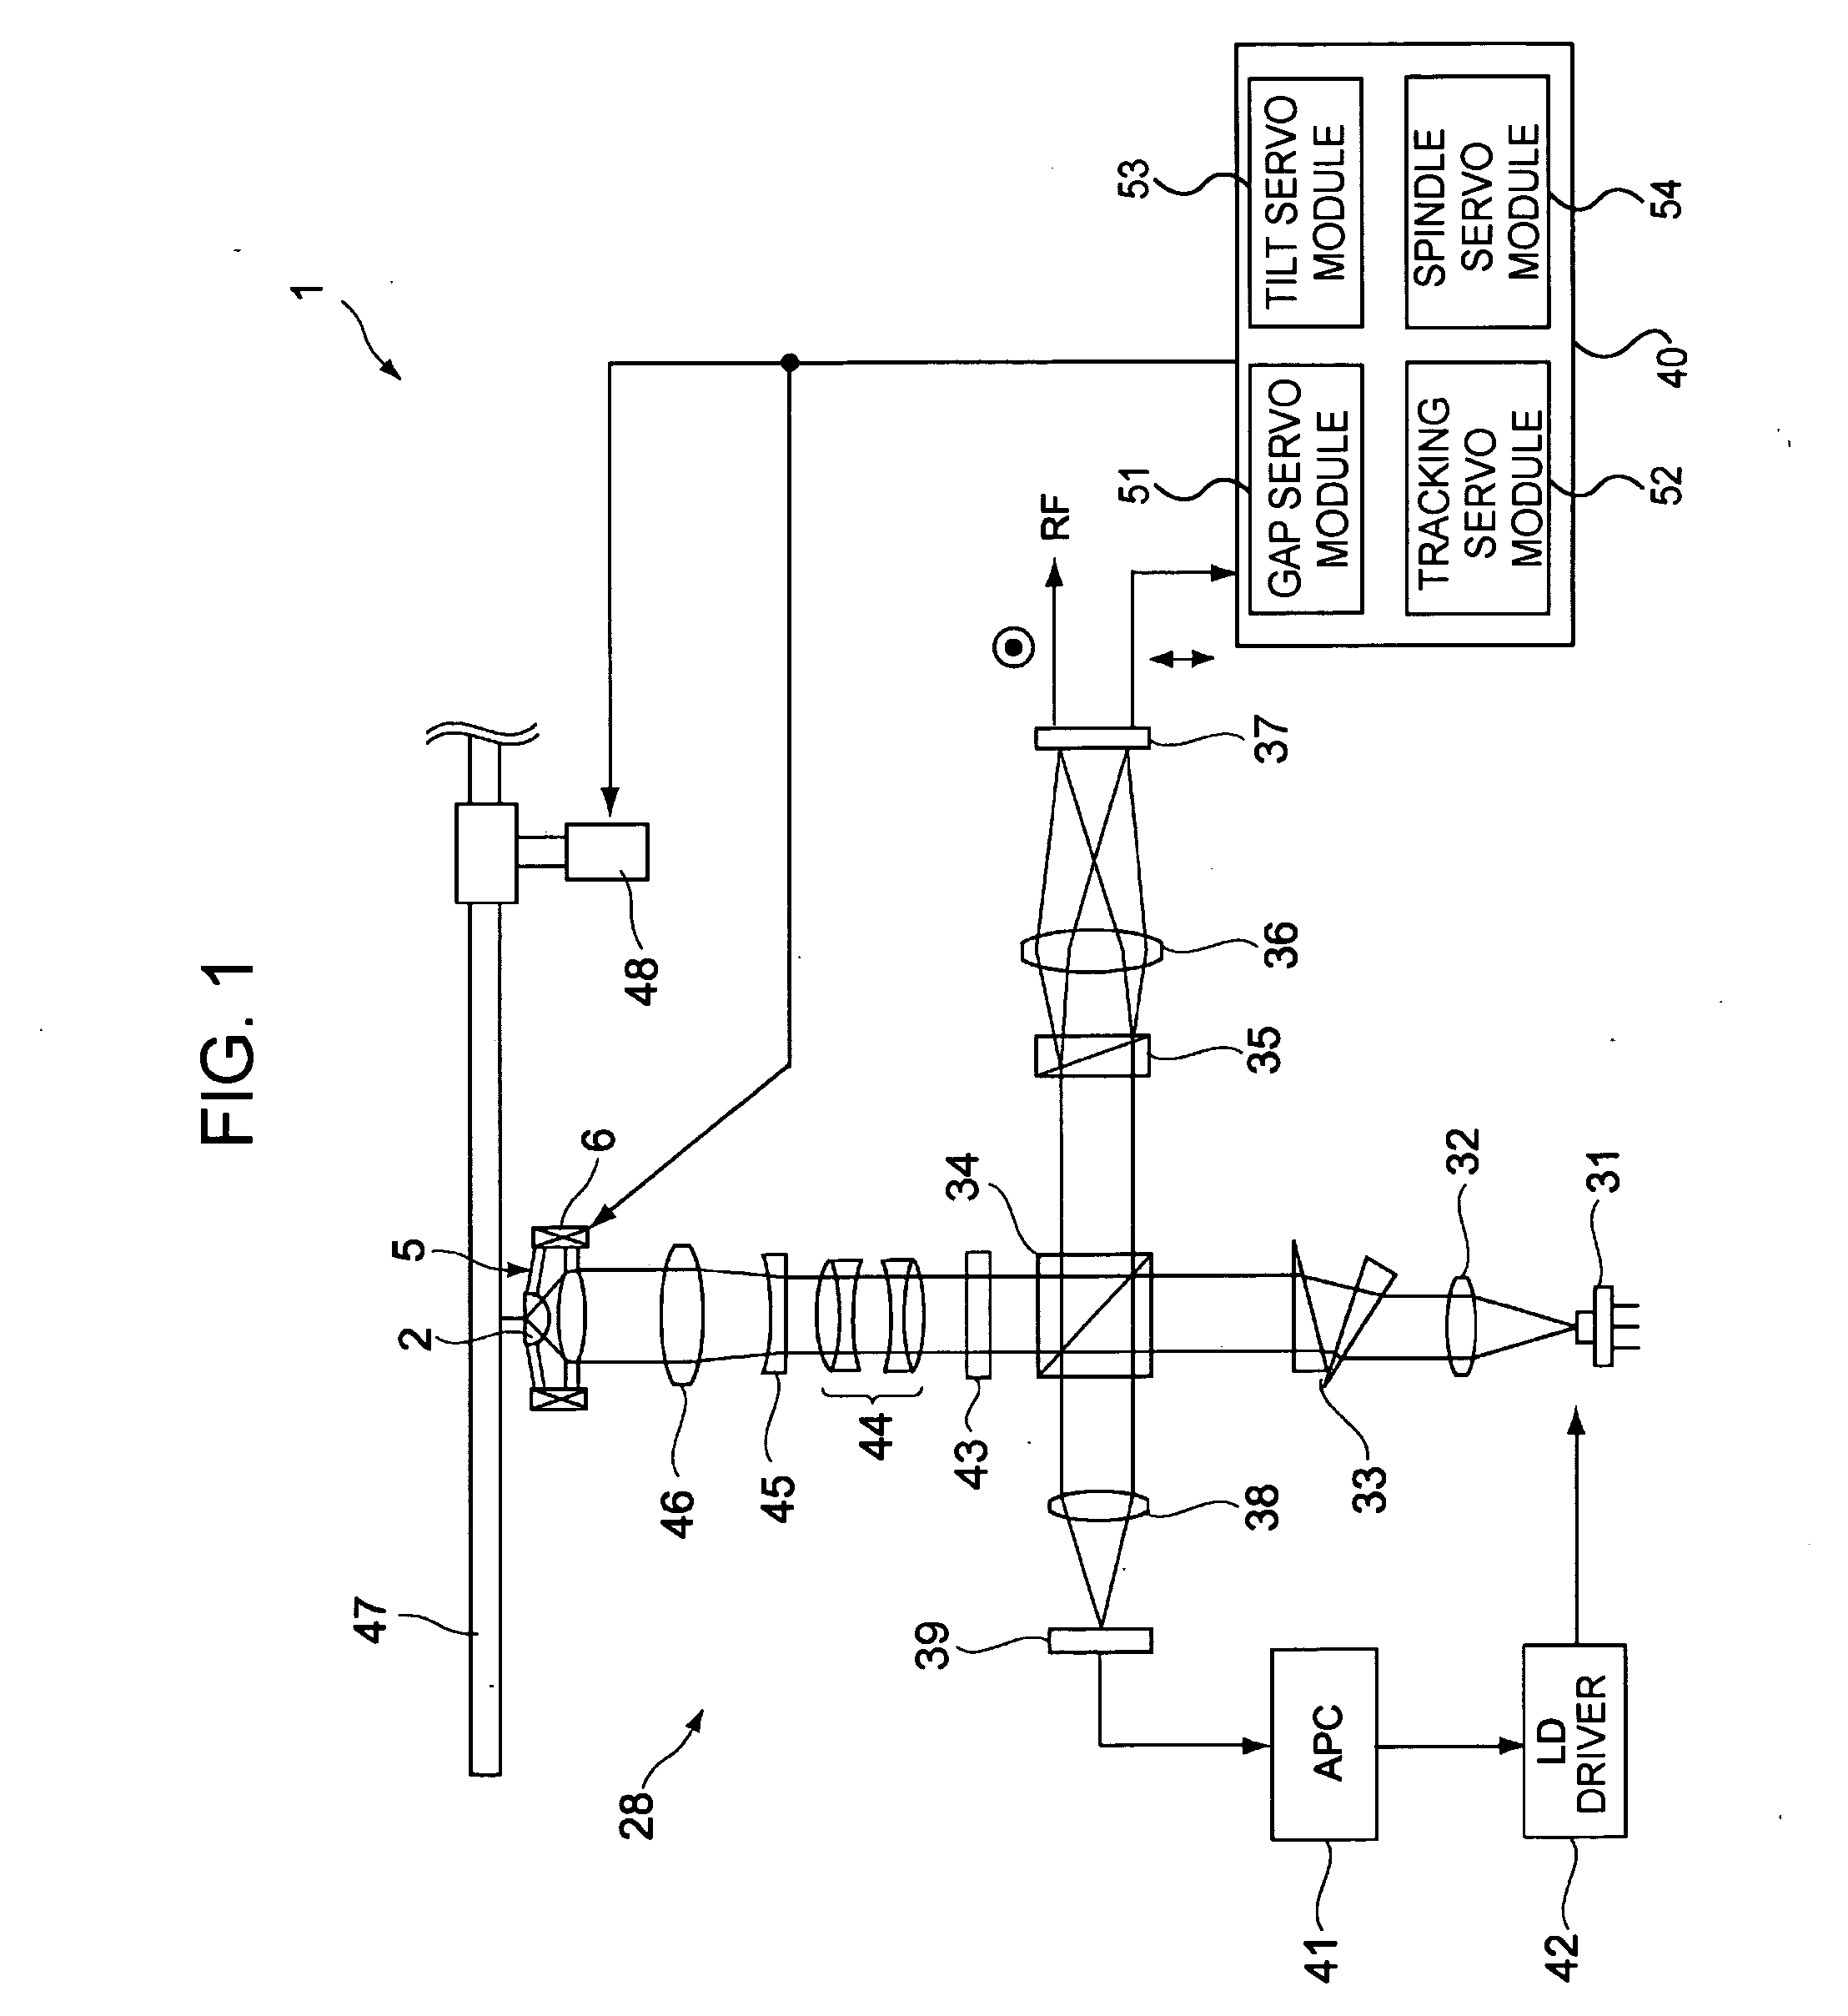 Optical disk drive, optical disk apparatus, and method for driving the apparatus